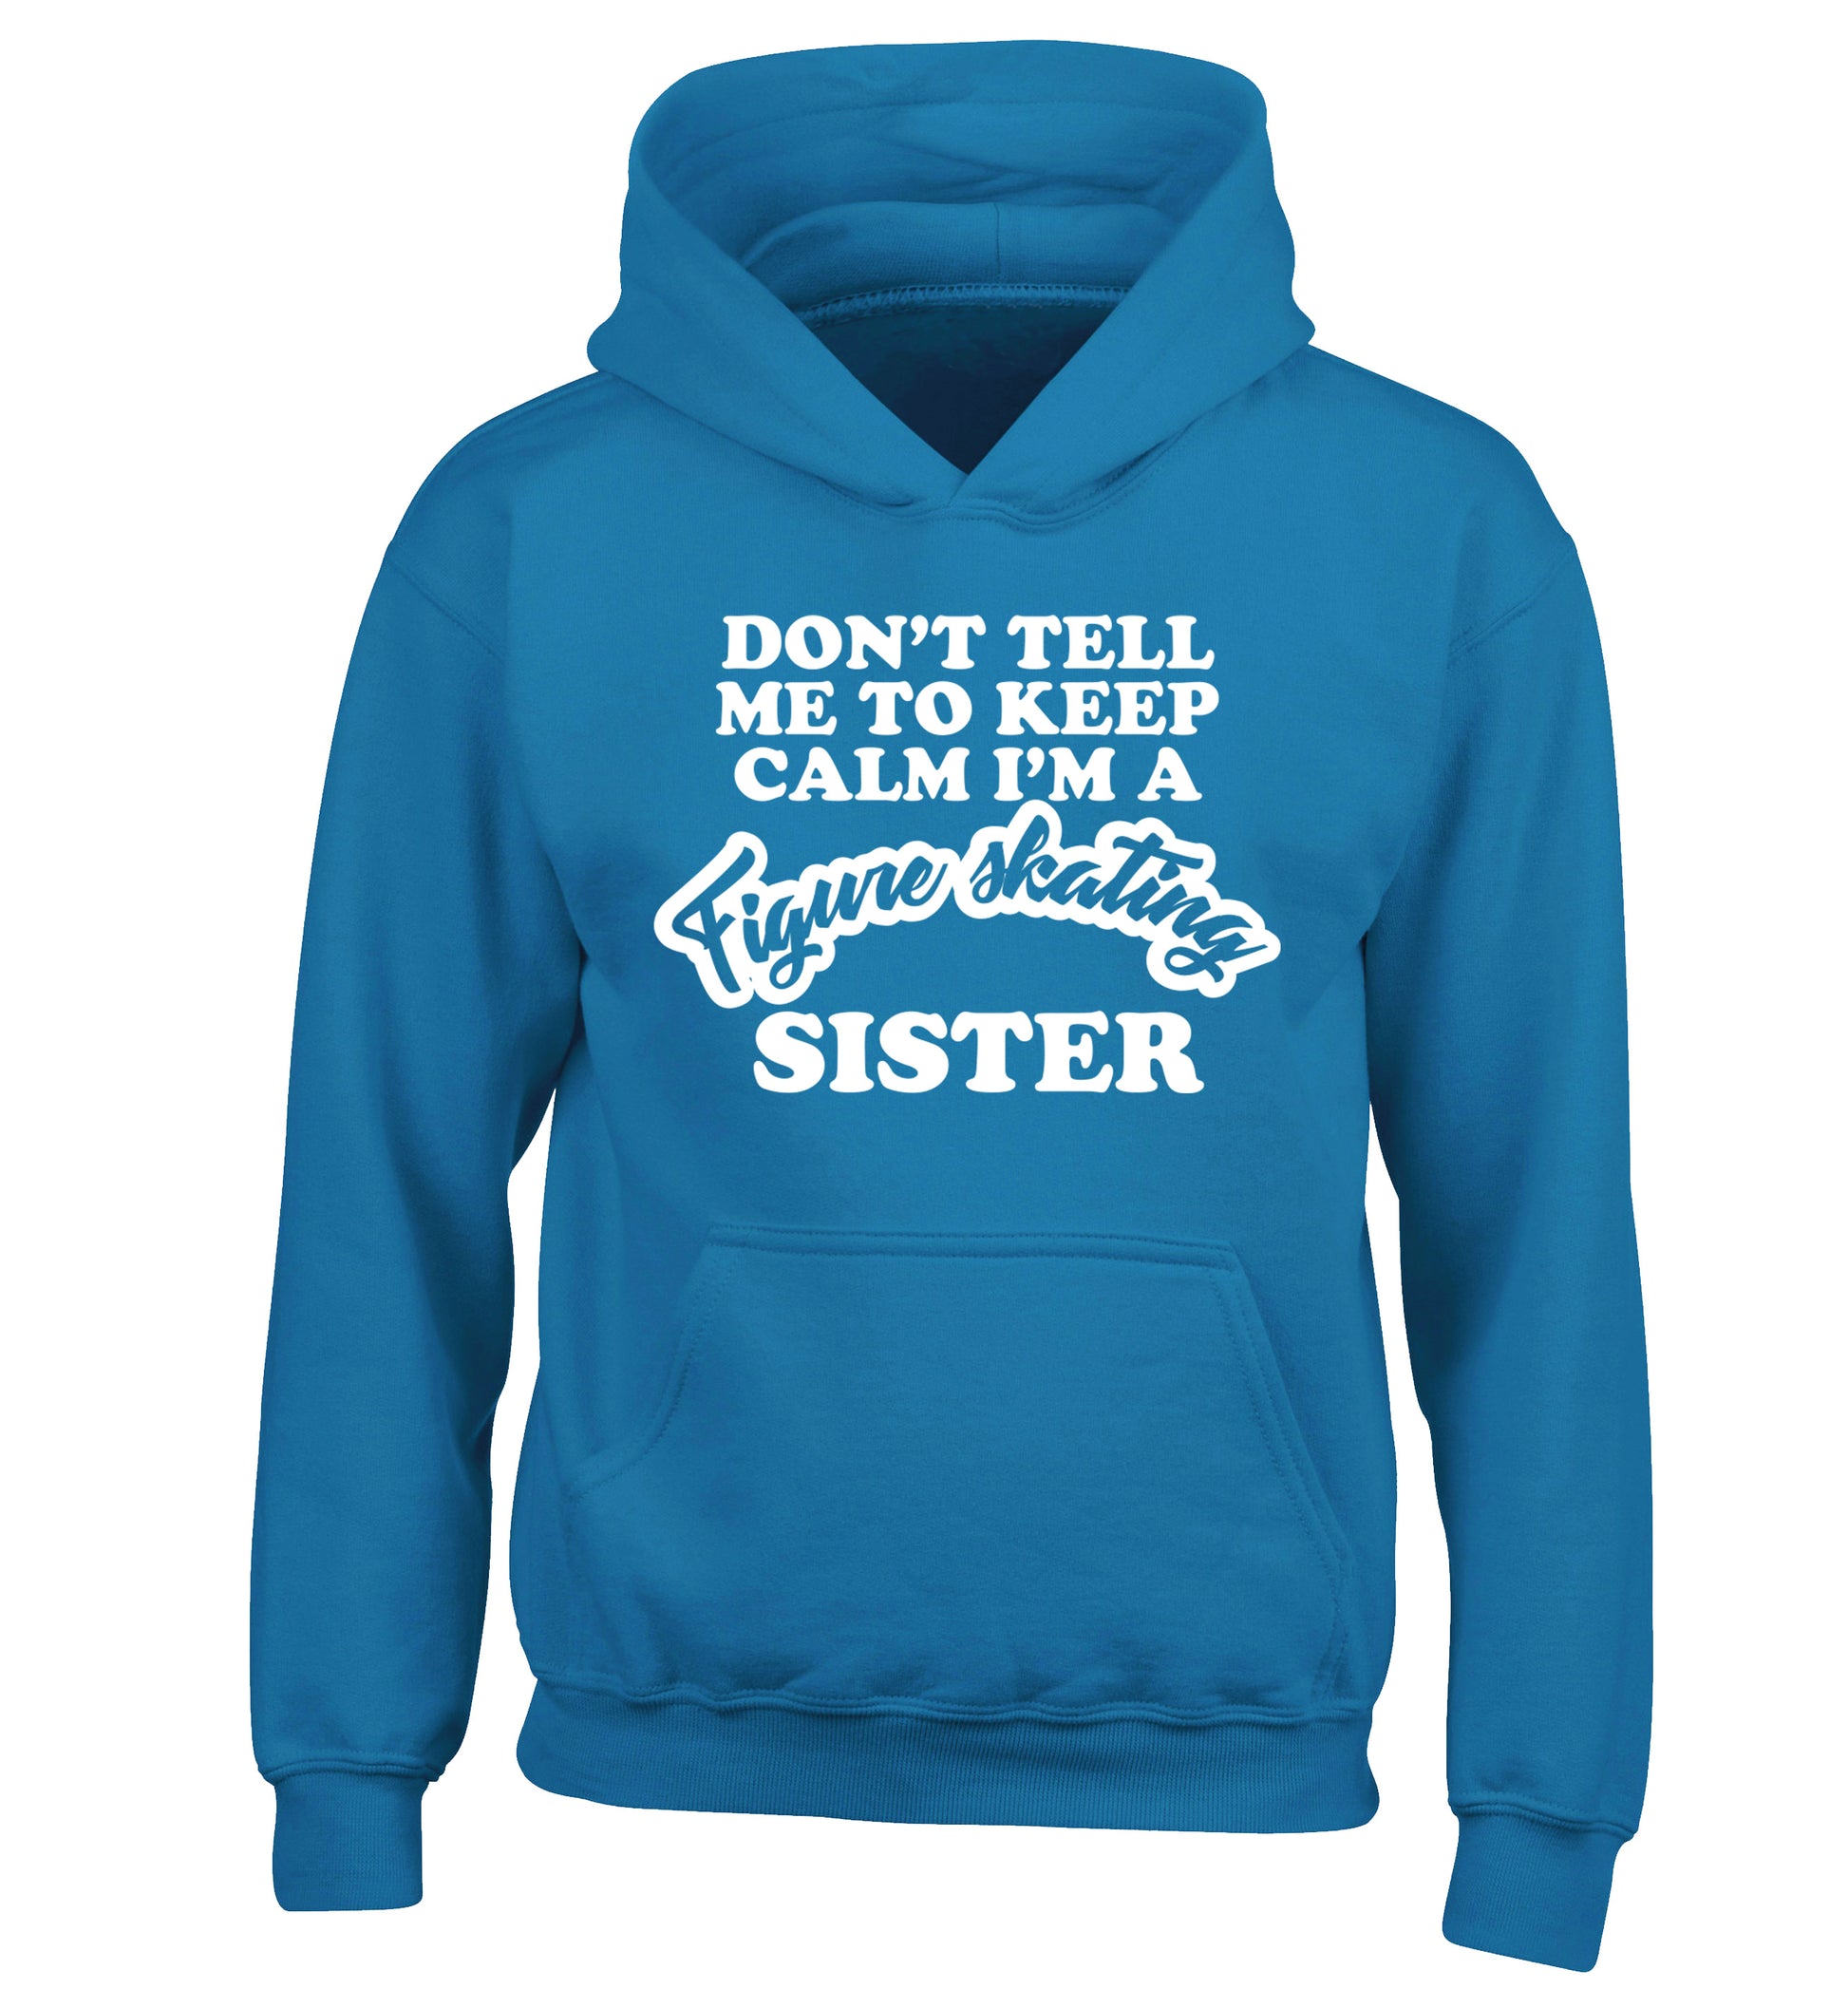 Don't tell me to keep calm I'm a figure skating sister children's blue hoodie 12-14 Years